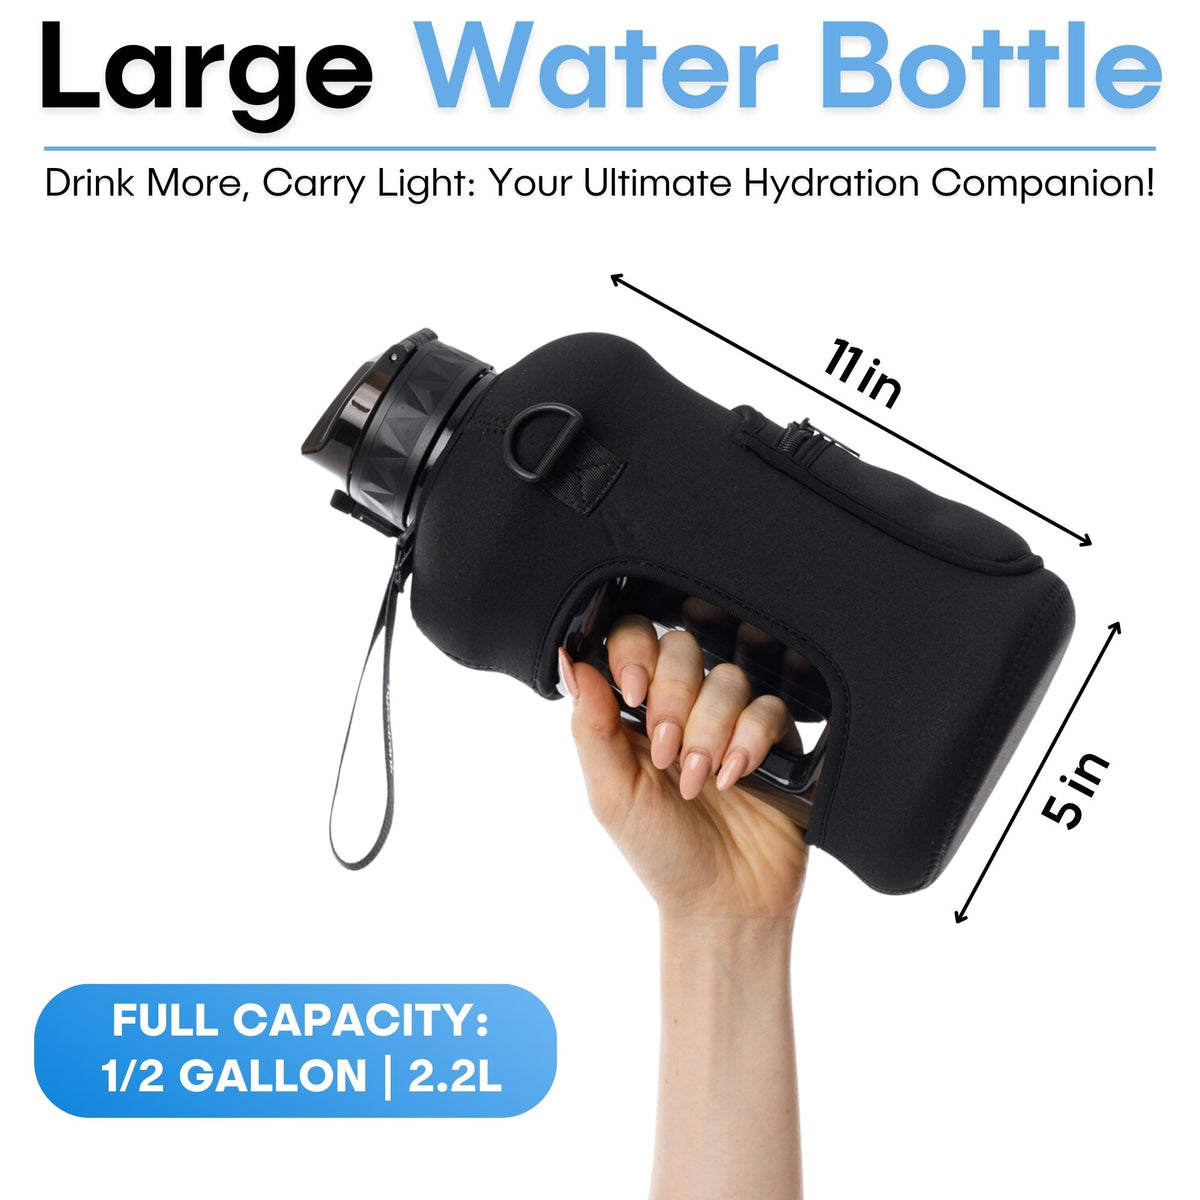 BarConic Juice Backup Container - Half Gallon